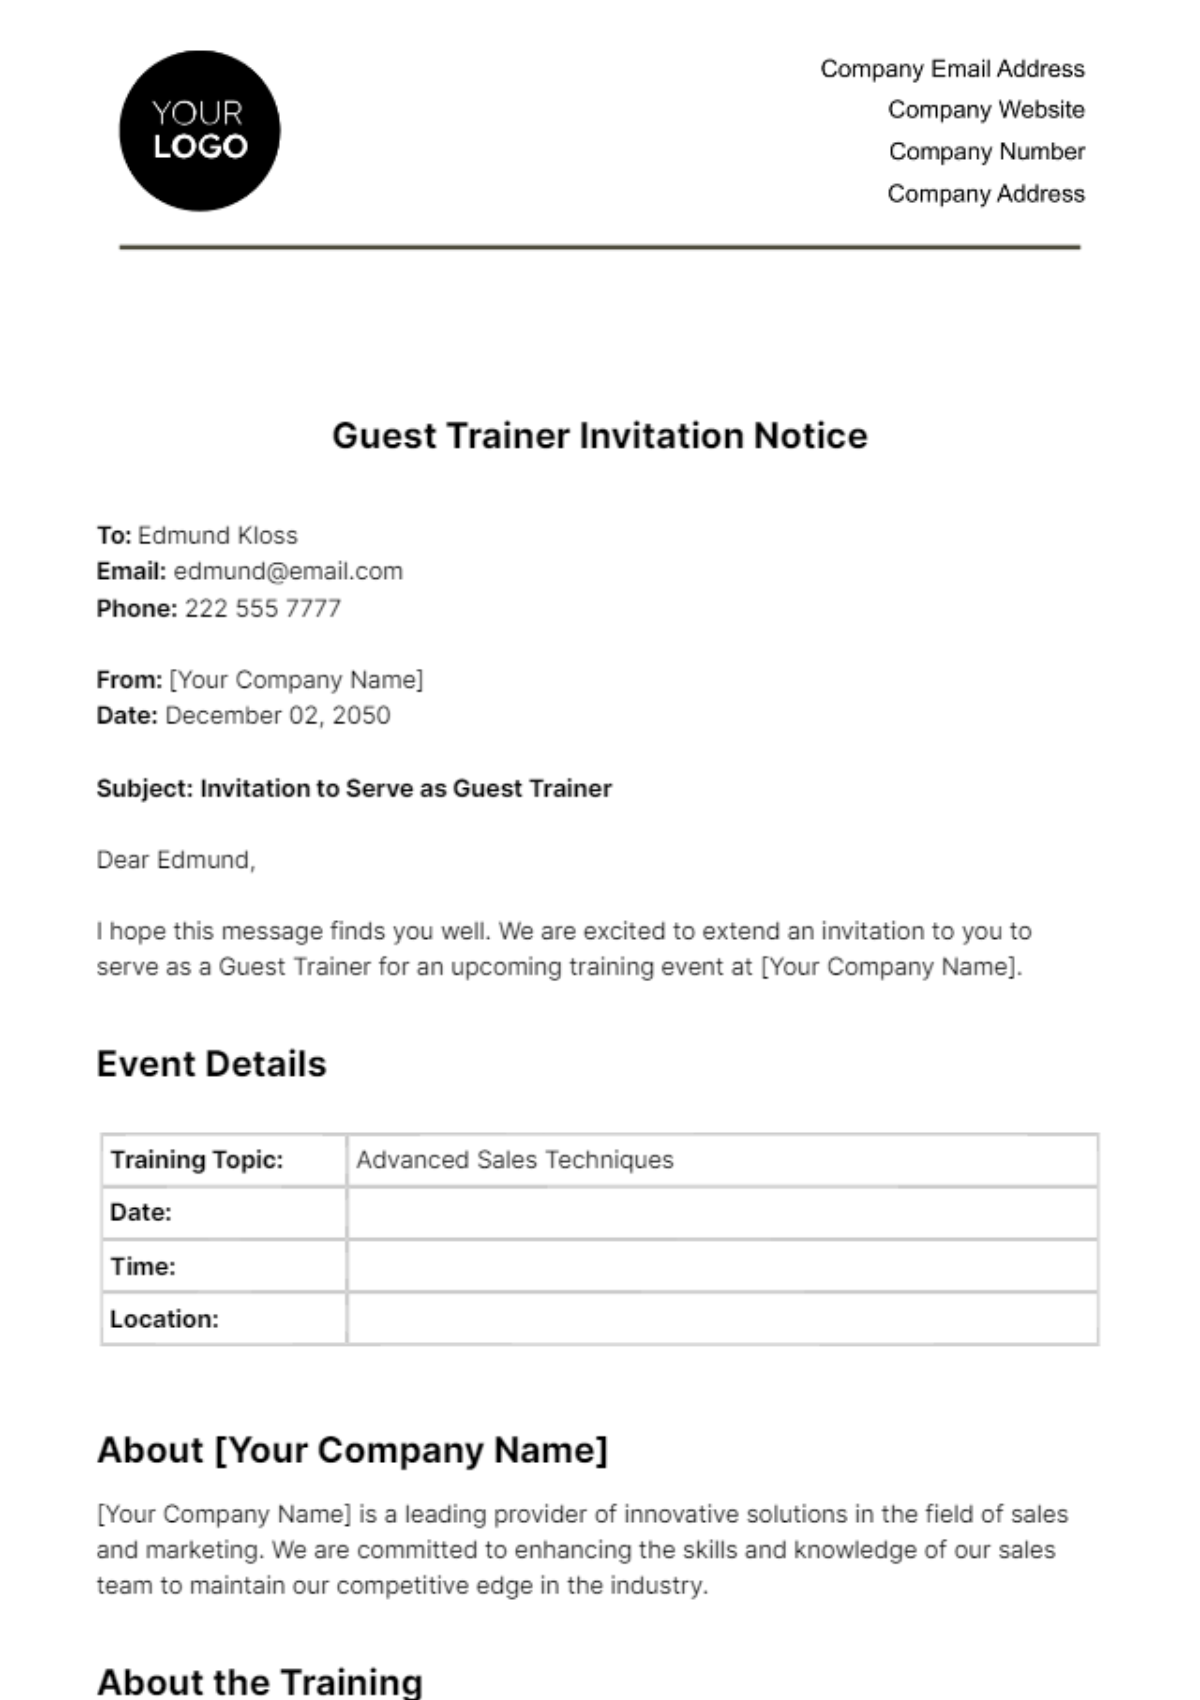 Free Guest Trainer Invitation Notice HR Template